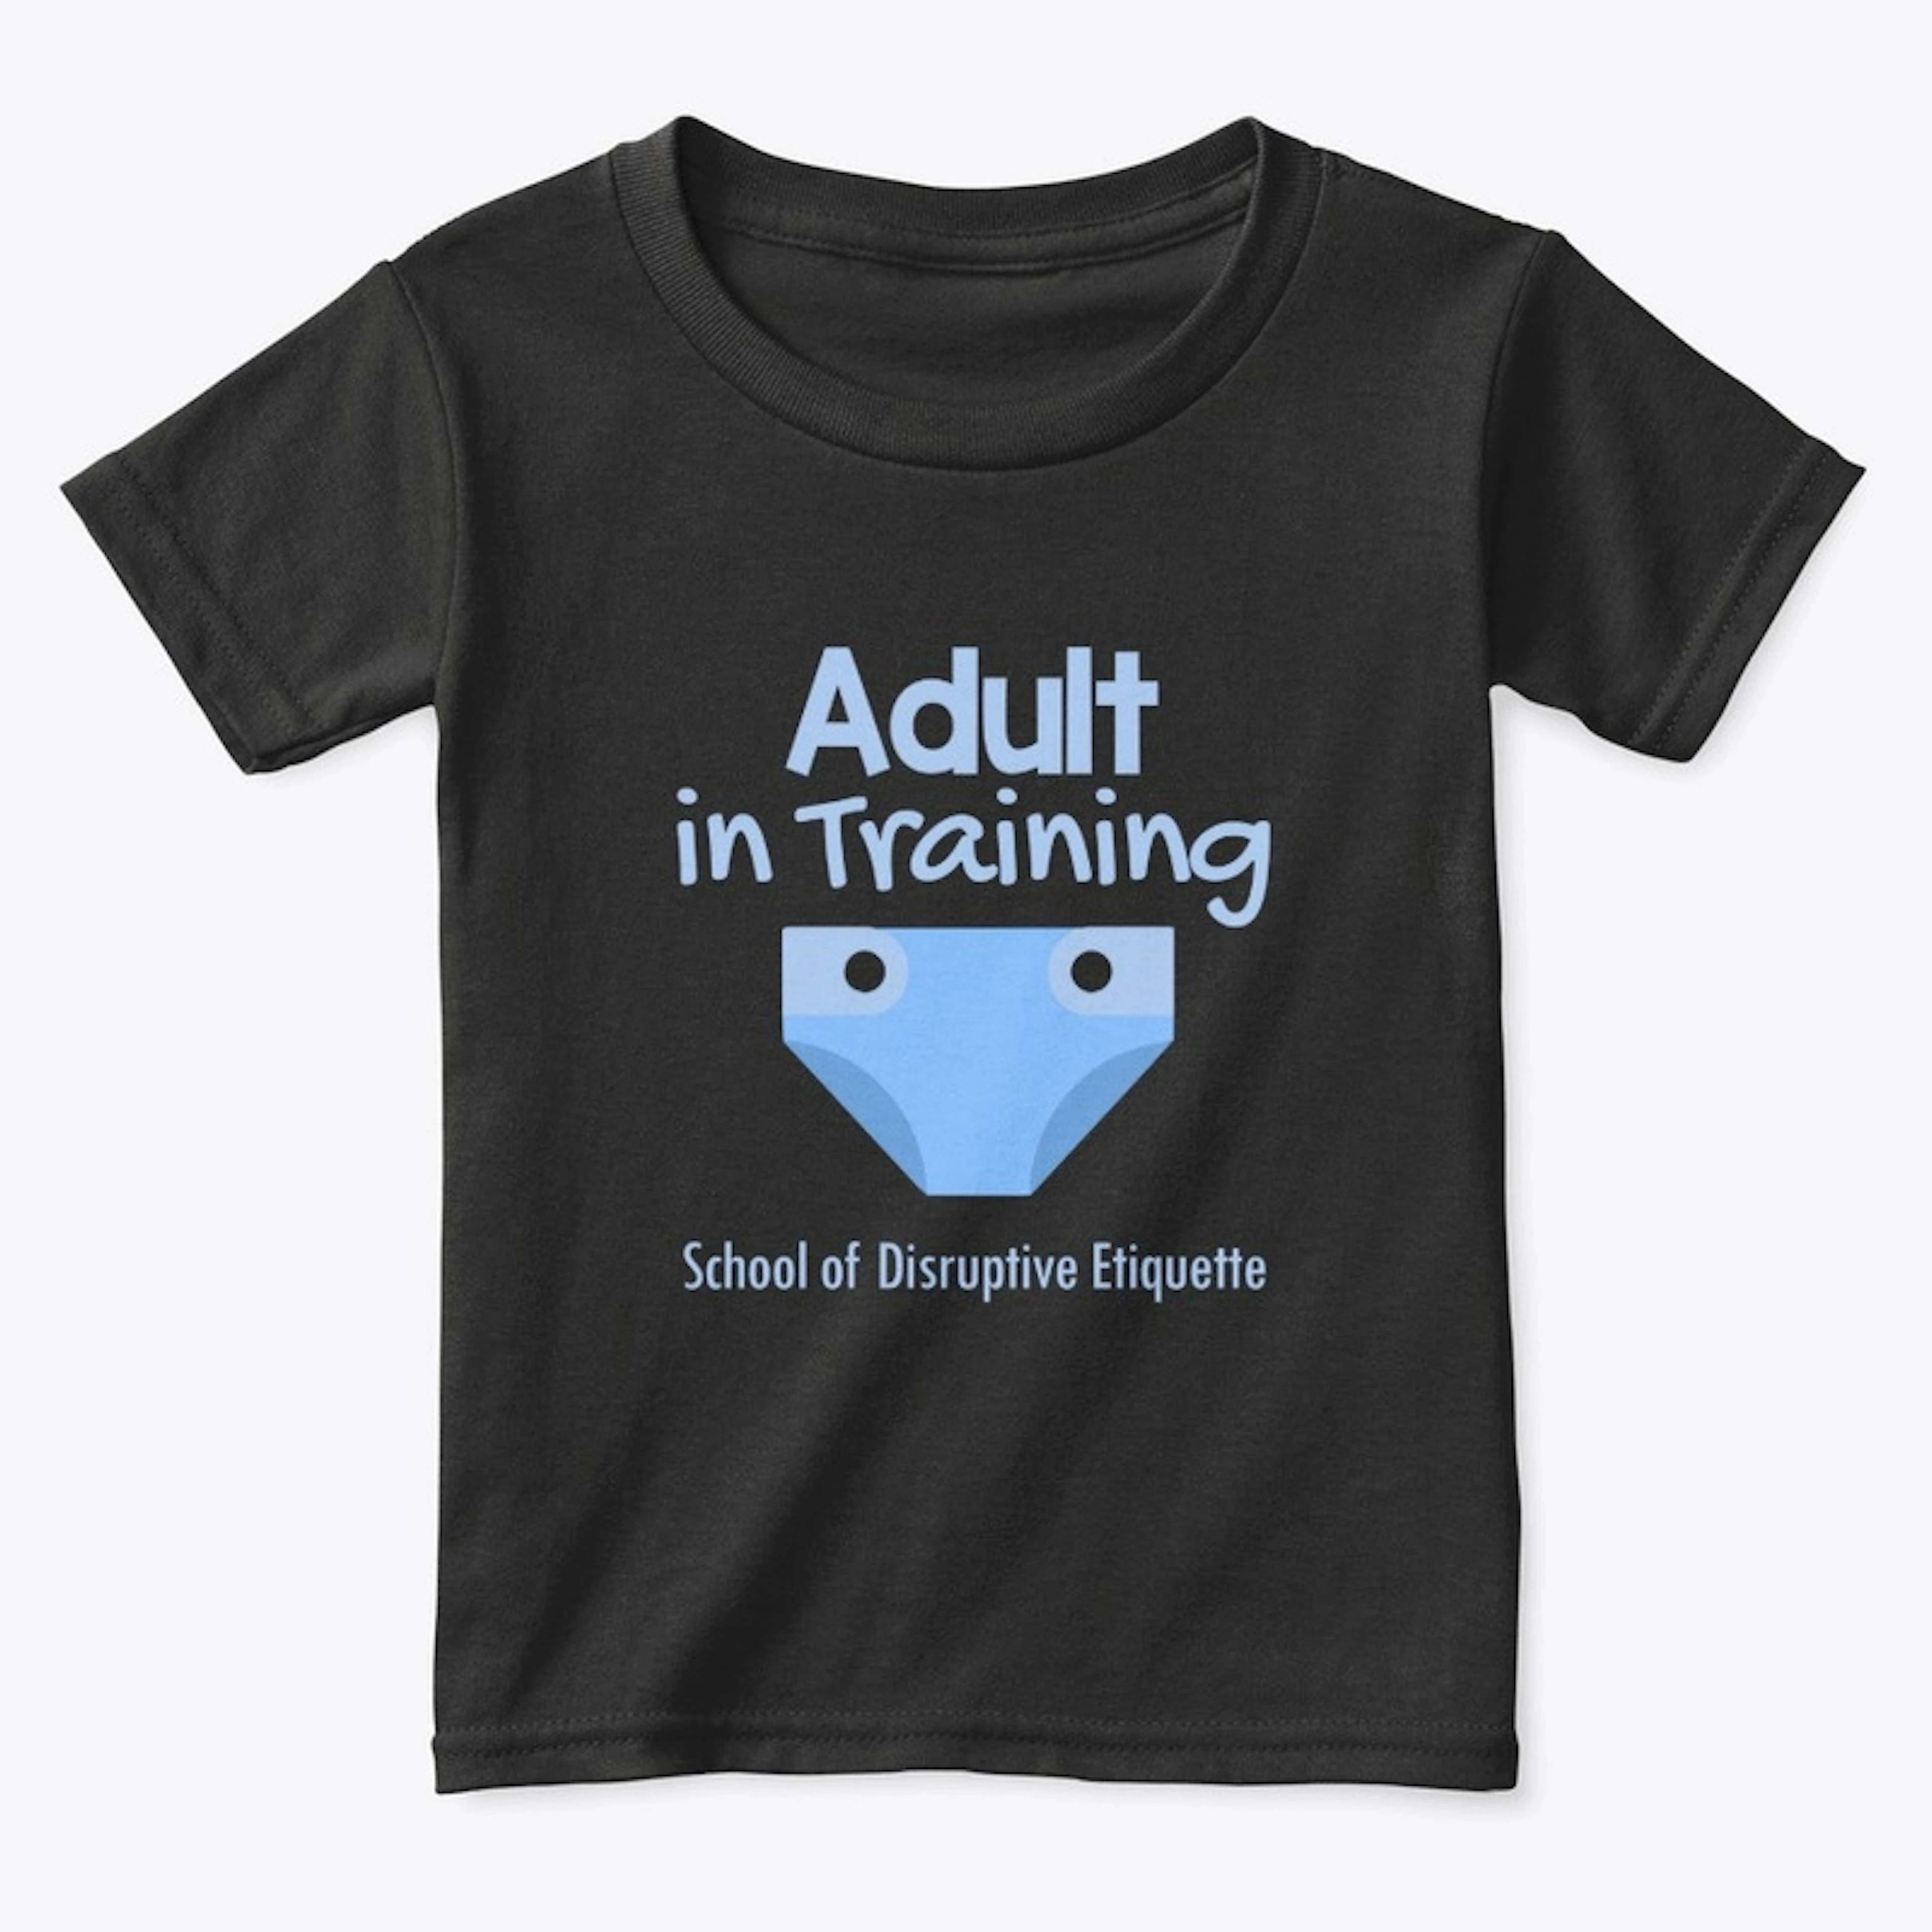 Adult in Training